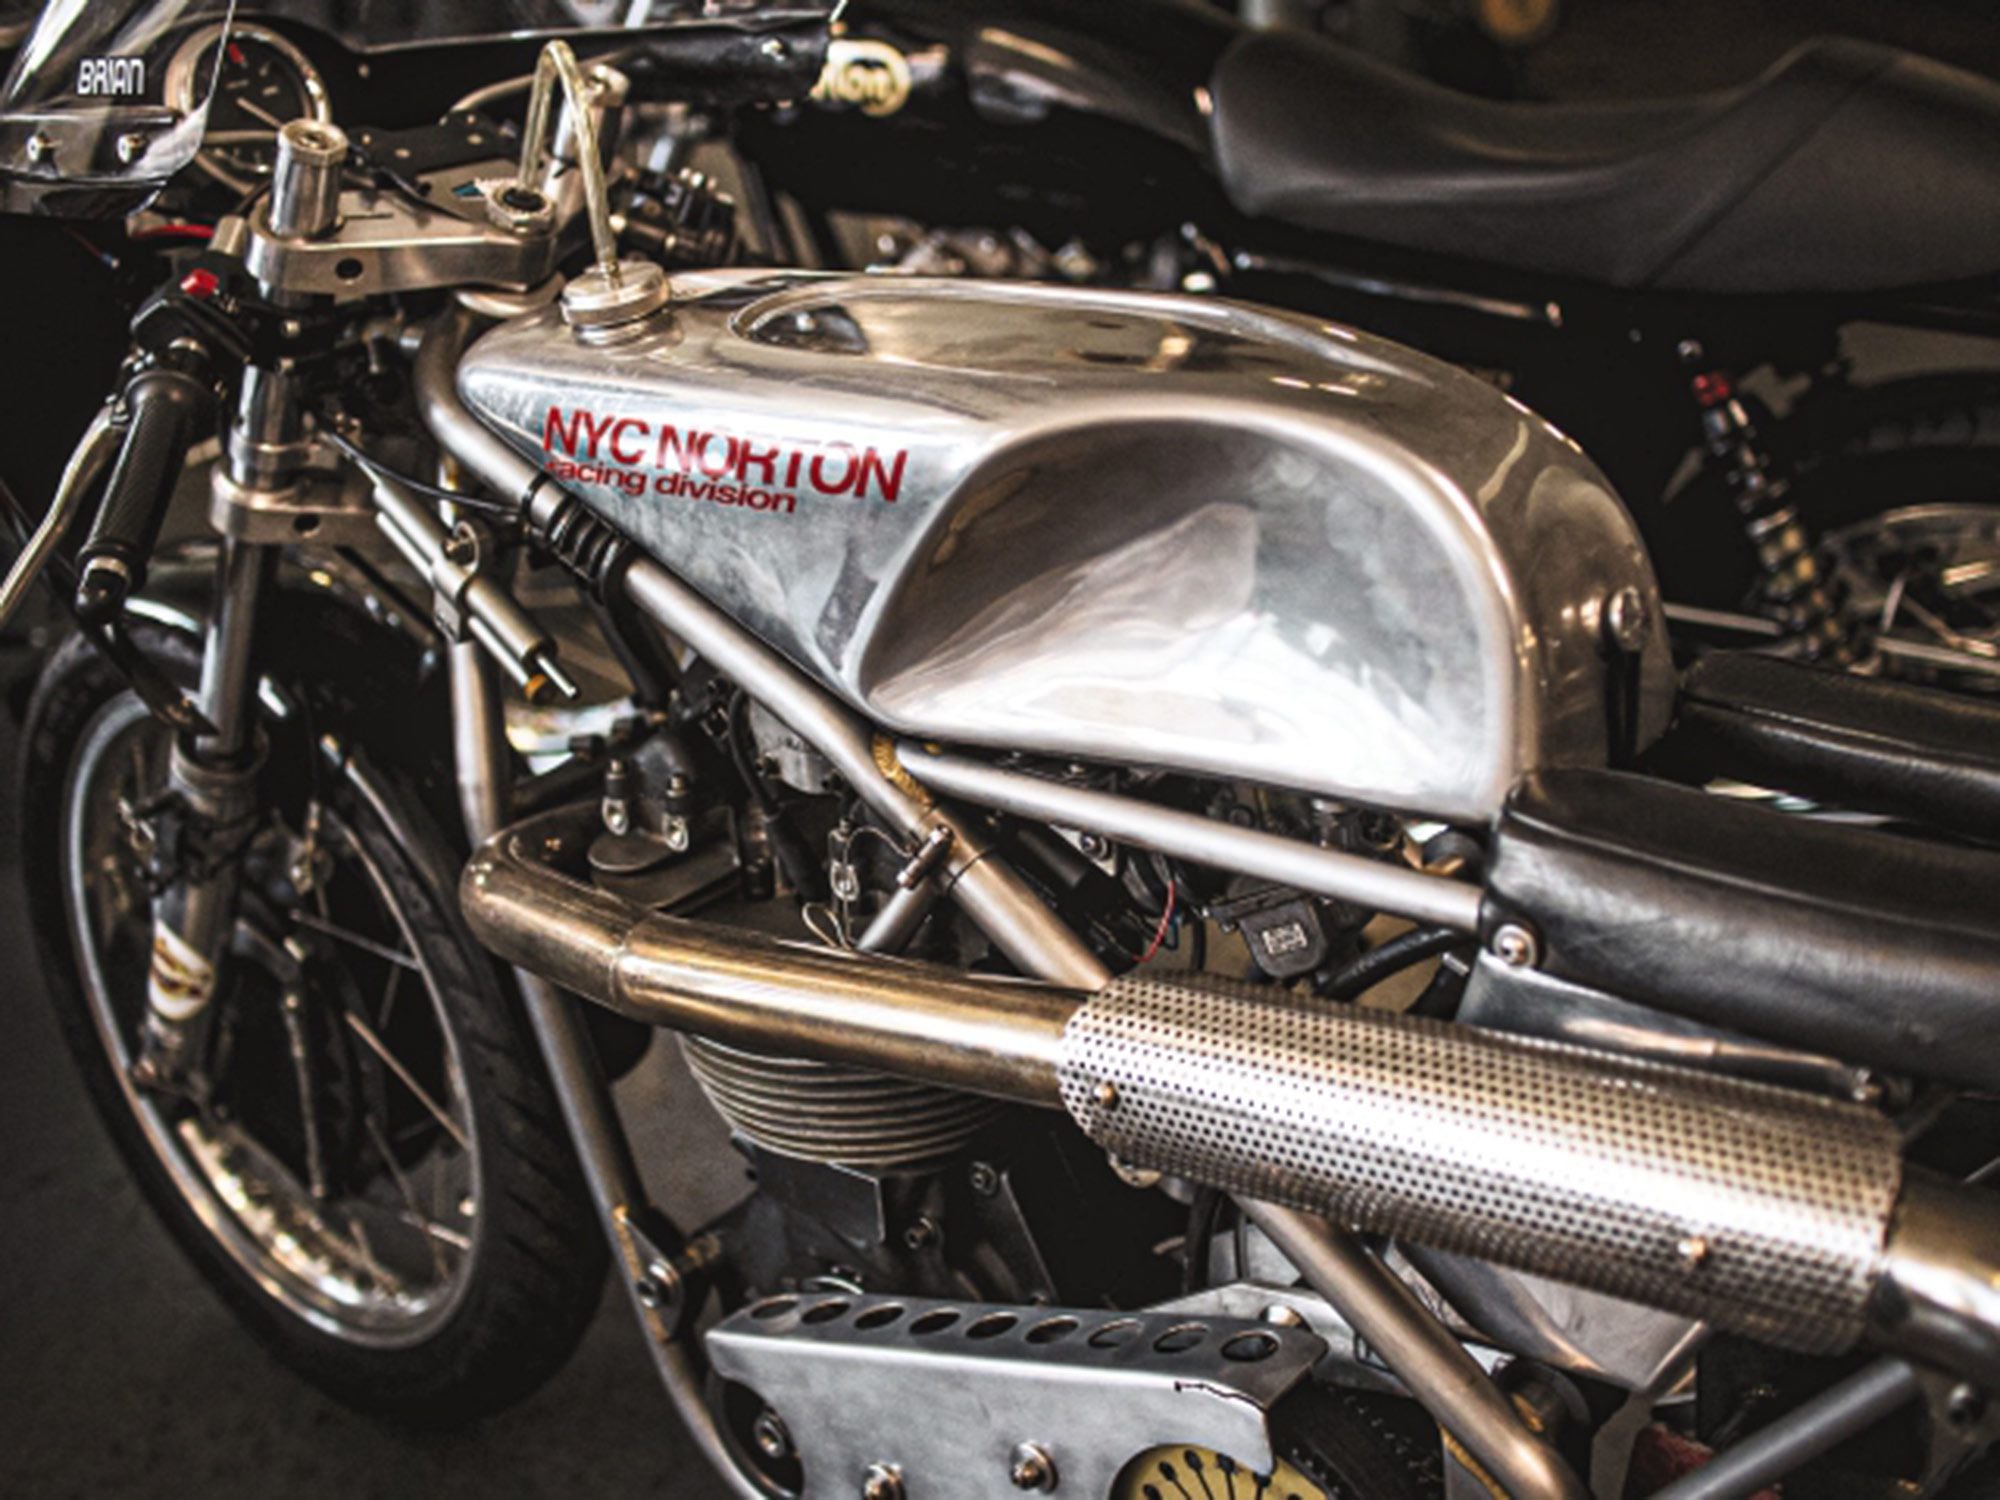 Cummings says of NYC Norton’s Seeley Commando racers: “When you’re on the gas, these bikes are incredible; when you’re not riding them hard, they just fight you all the way. Featherbeds are a little easier, a little more forgiving.”